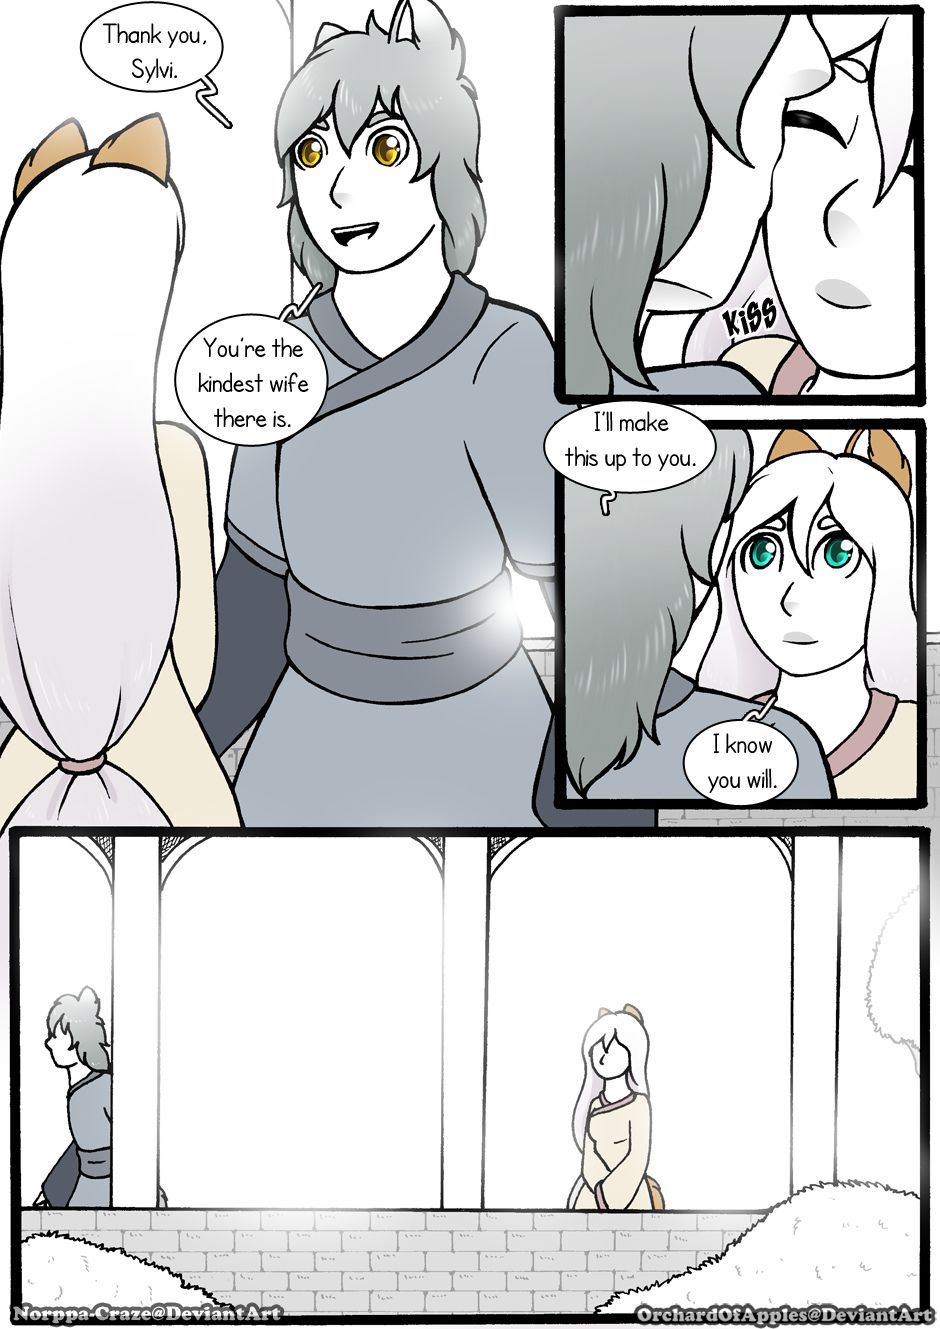 [Jeny-jen94] Between Kings and Queens [Ongoing] 321